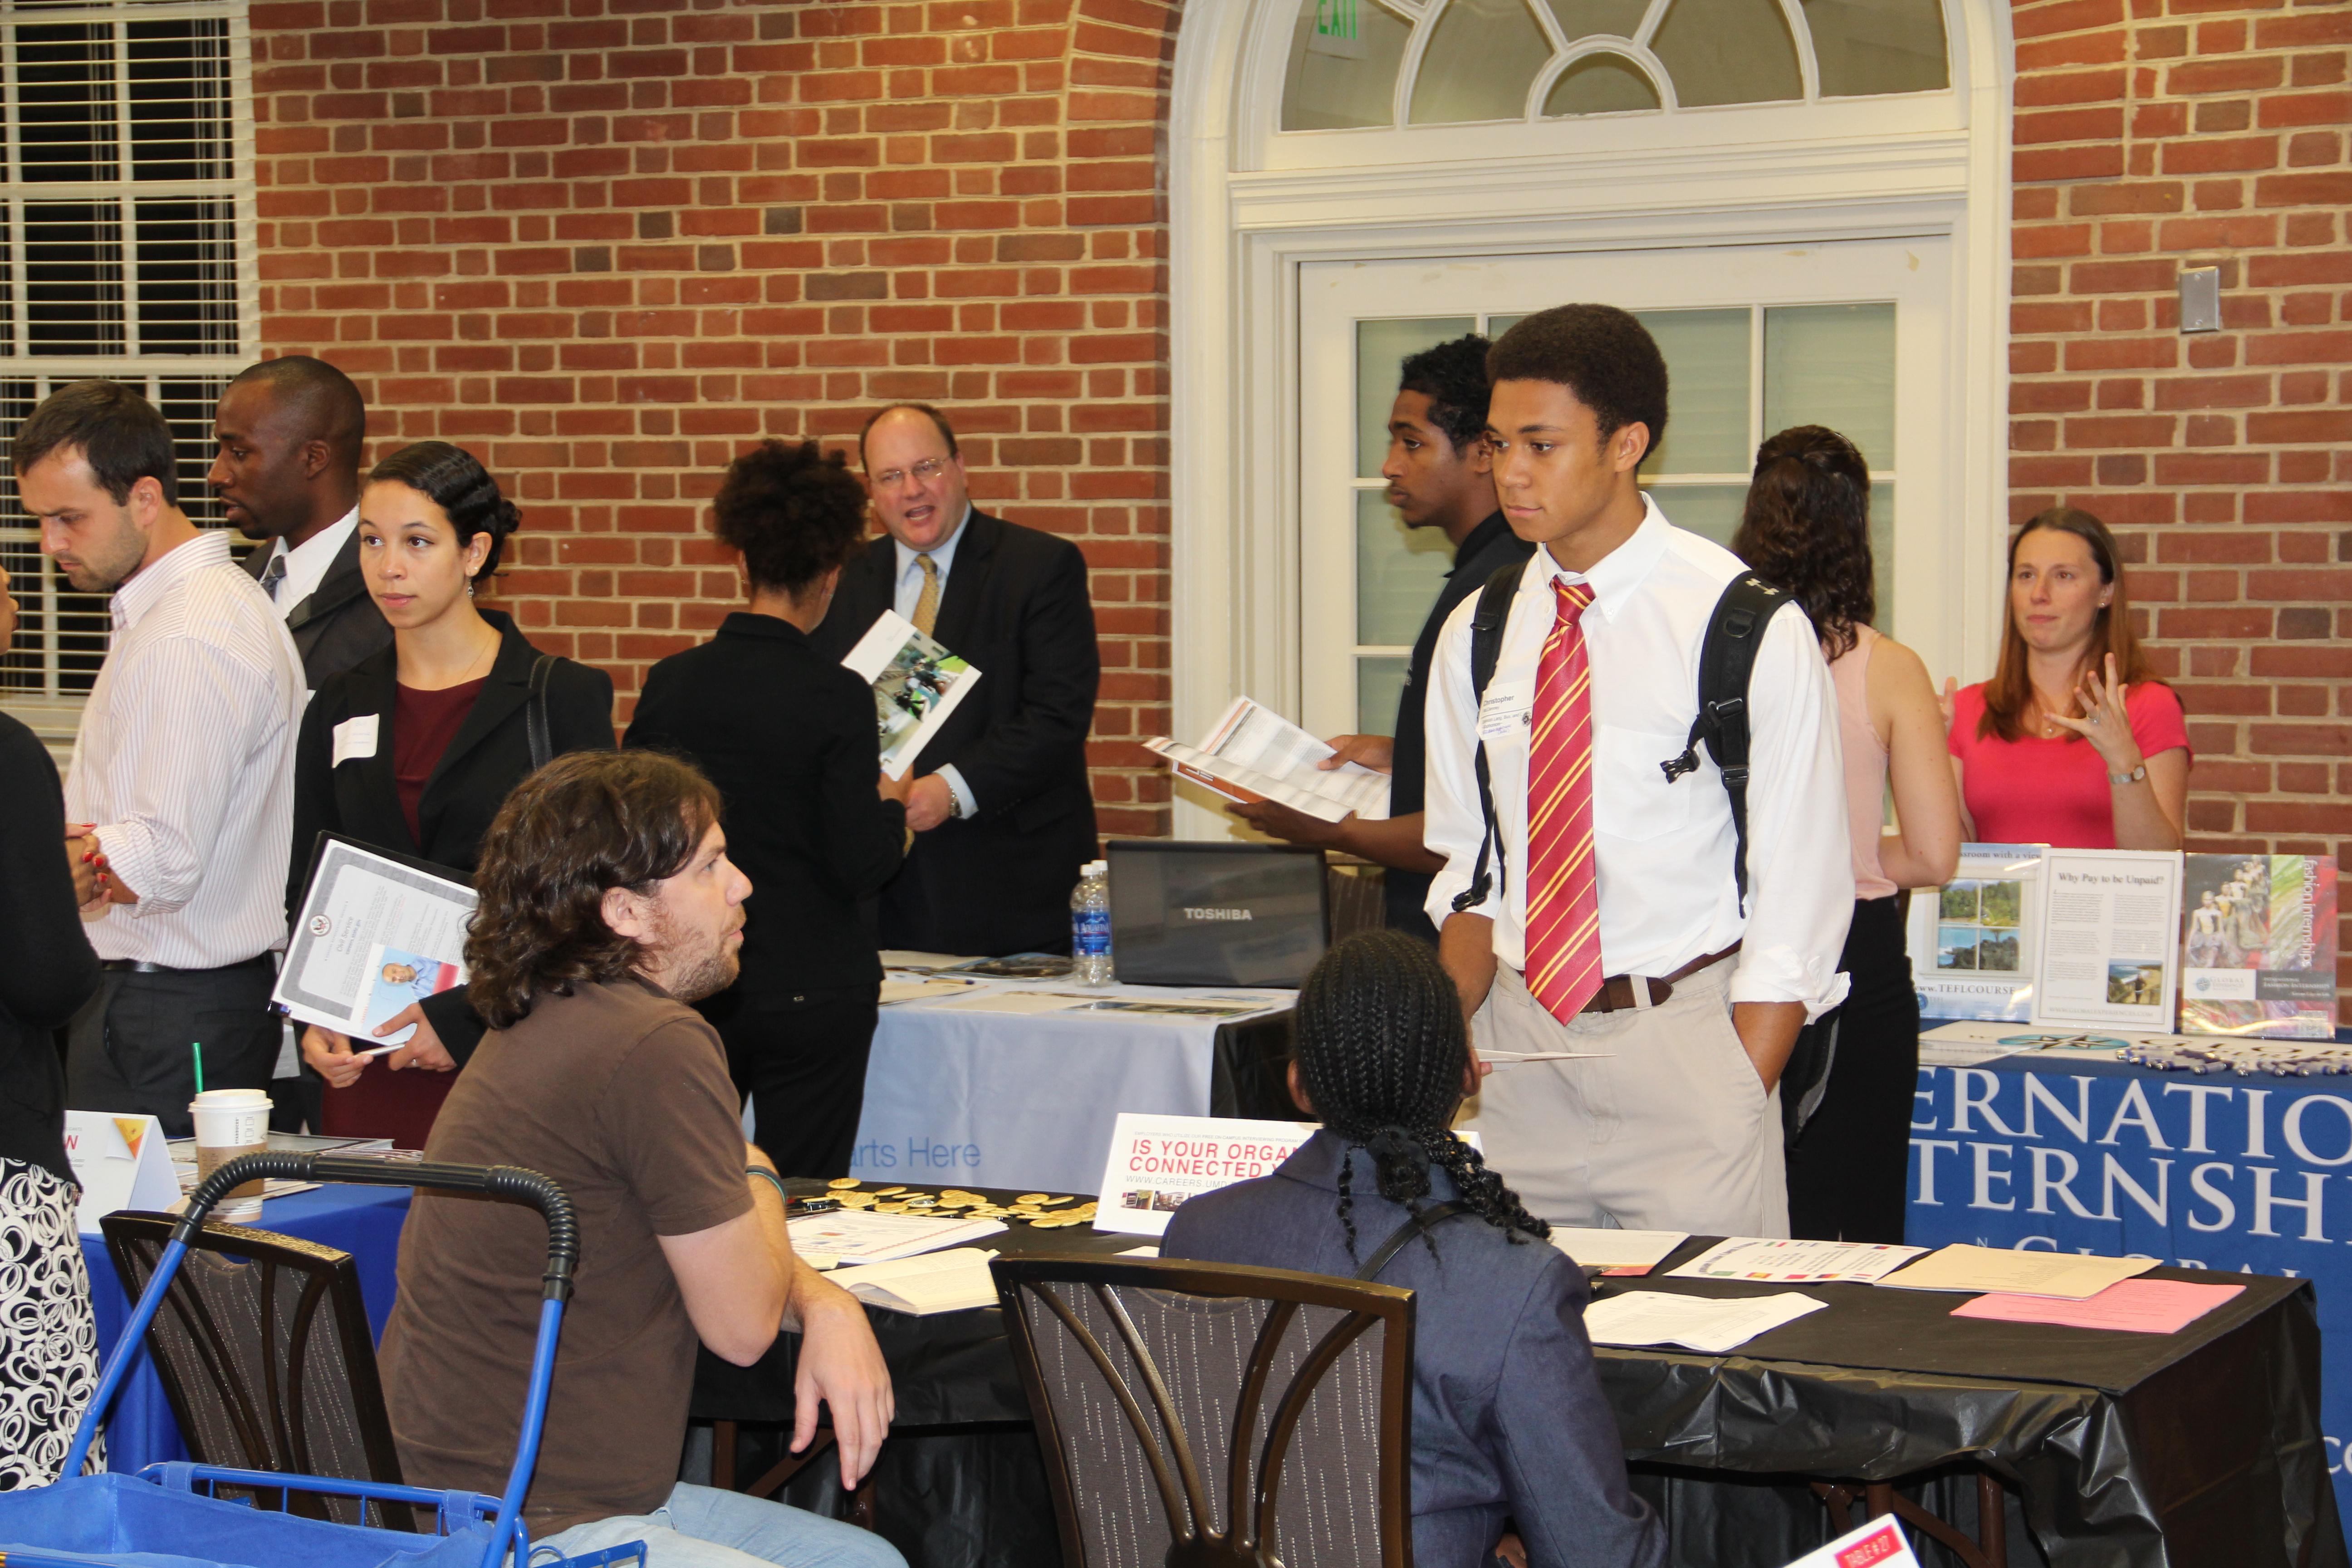 Student and employers speaking at a career fair